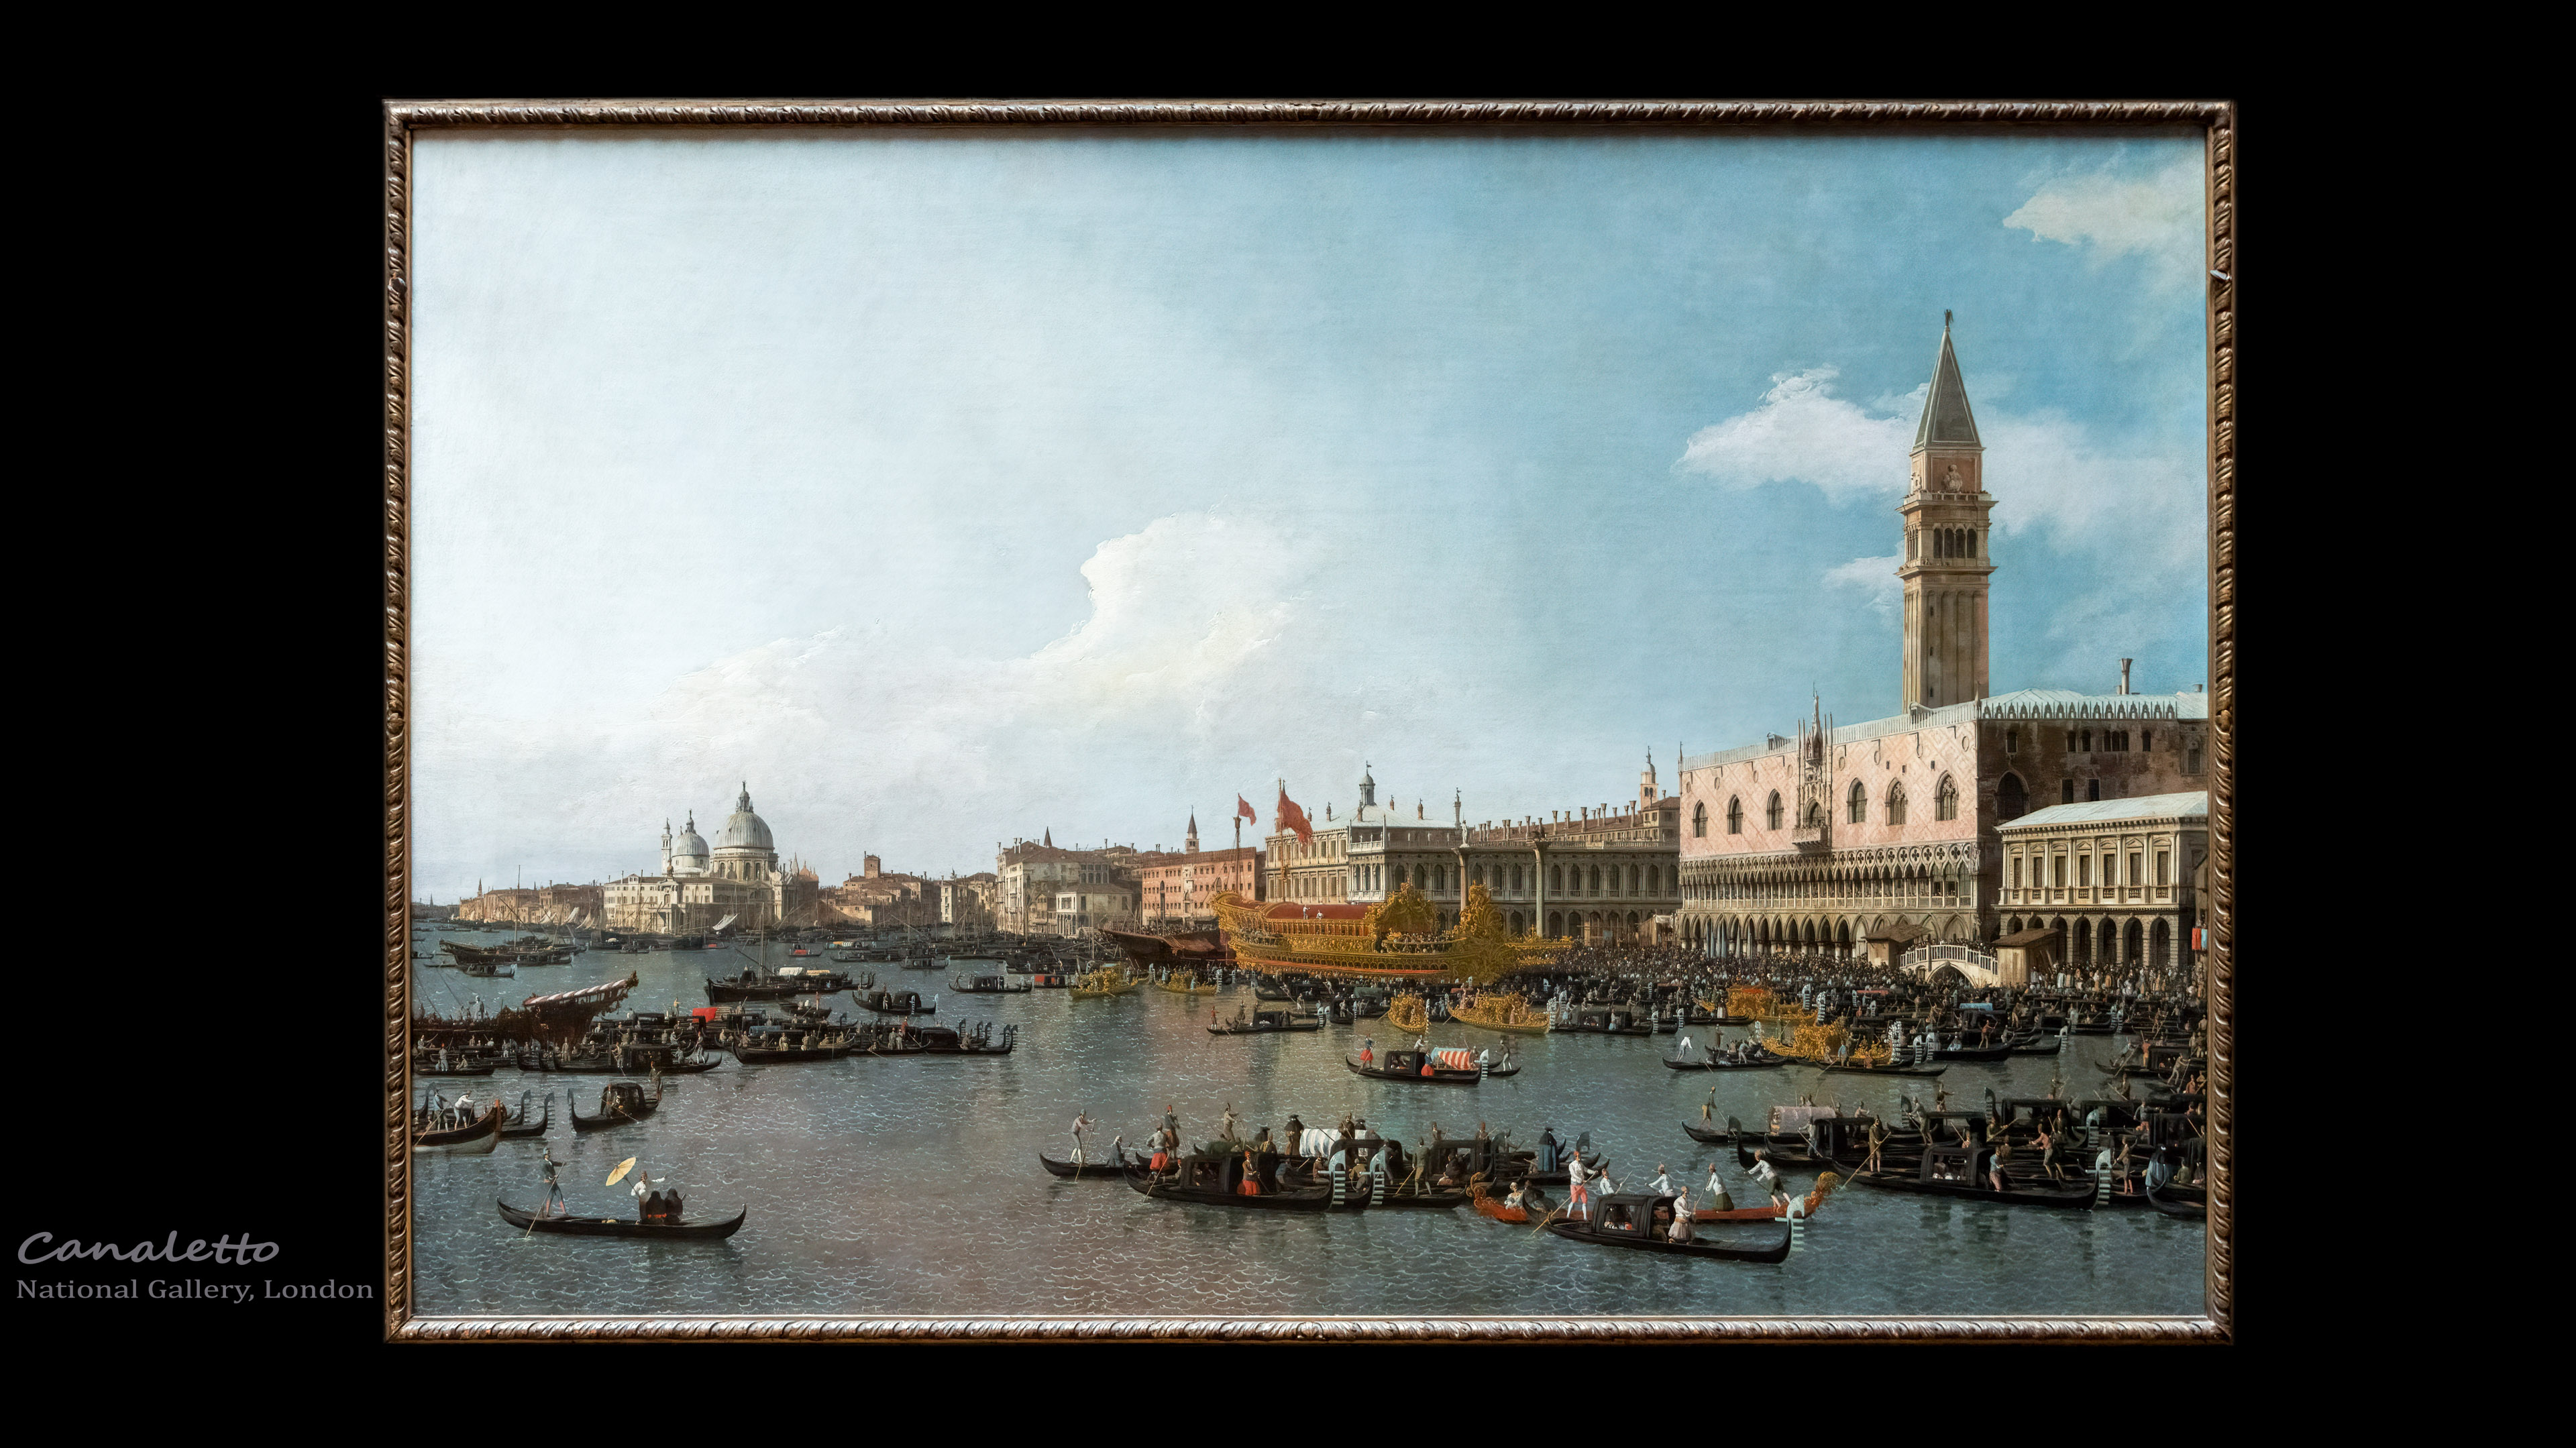 Admire the beauty and detail of the Italian vedutista with Canaletto wallpaper, featuring his realistic and panoramic views of Venice that captured the light and atmosphere.